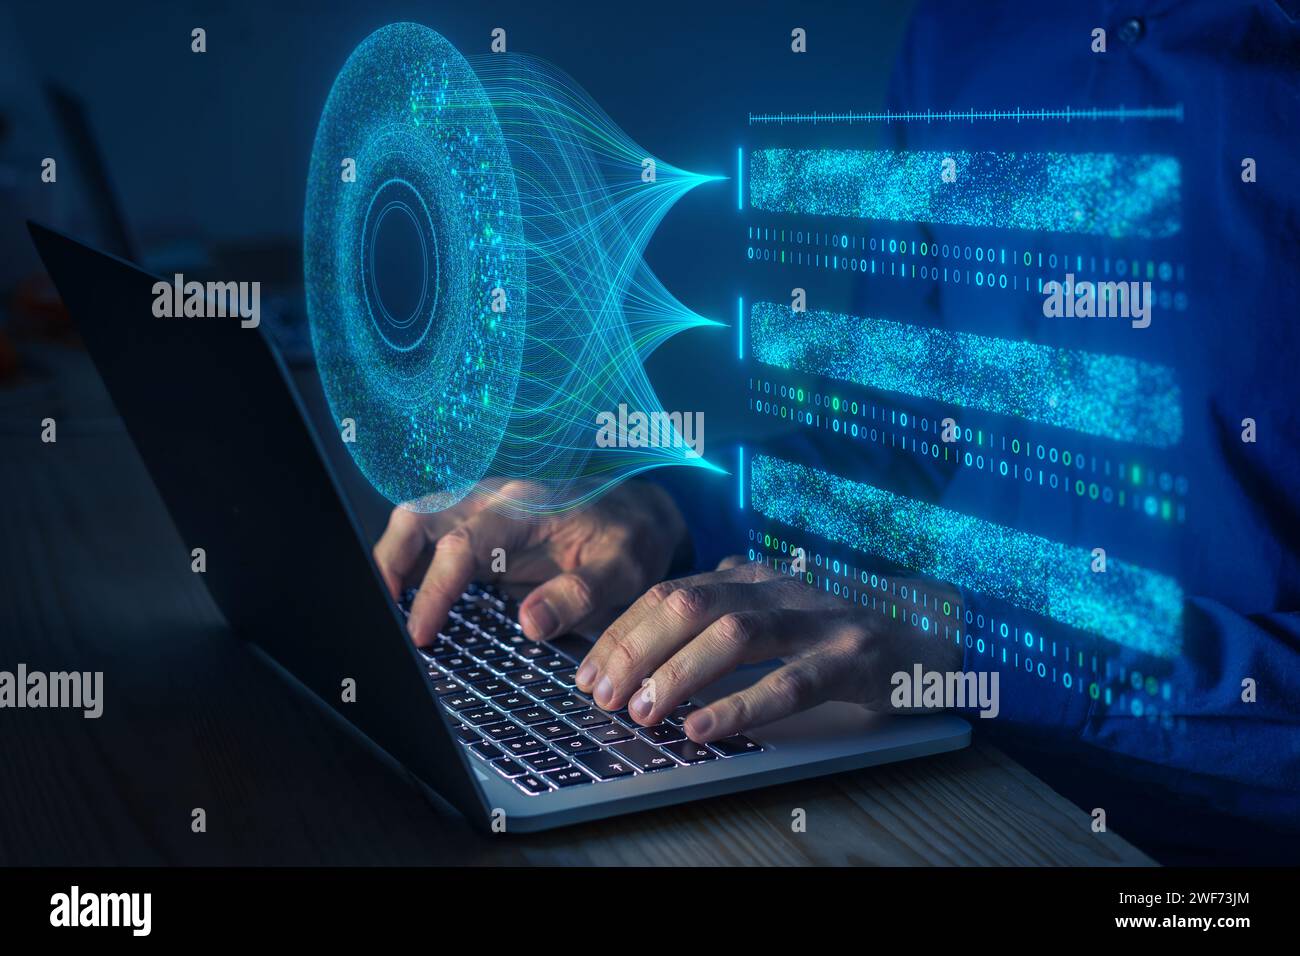 Big data analysis with AI technology. Person using machine learning and deep learning neural network for data science, data mining, business analytics Stock Photo